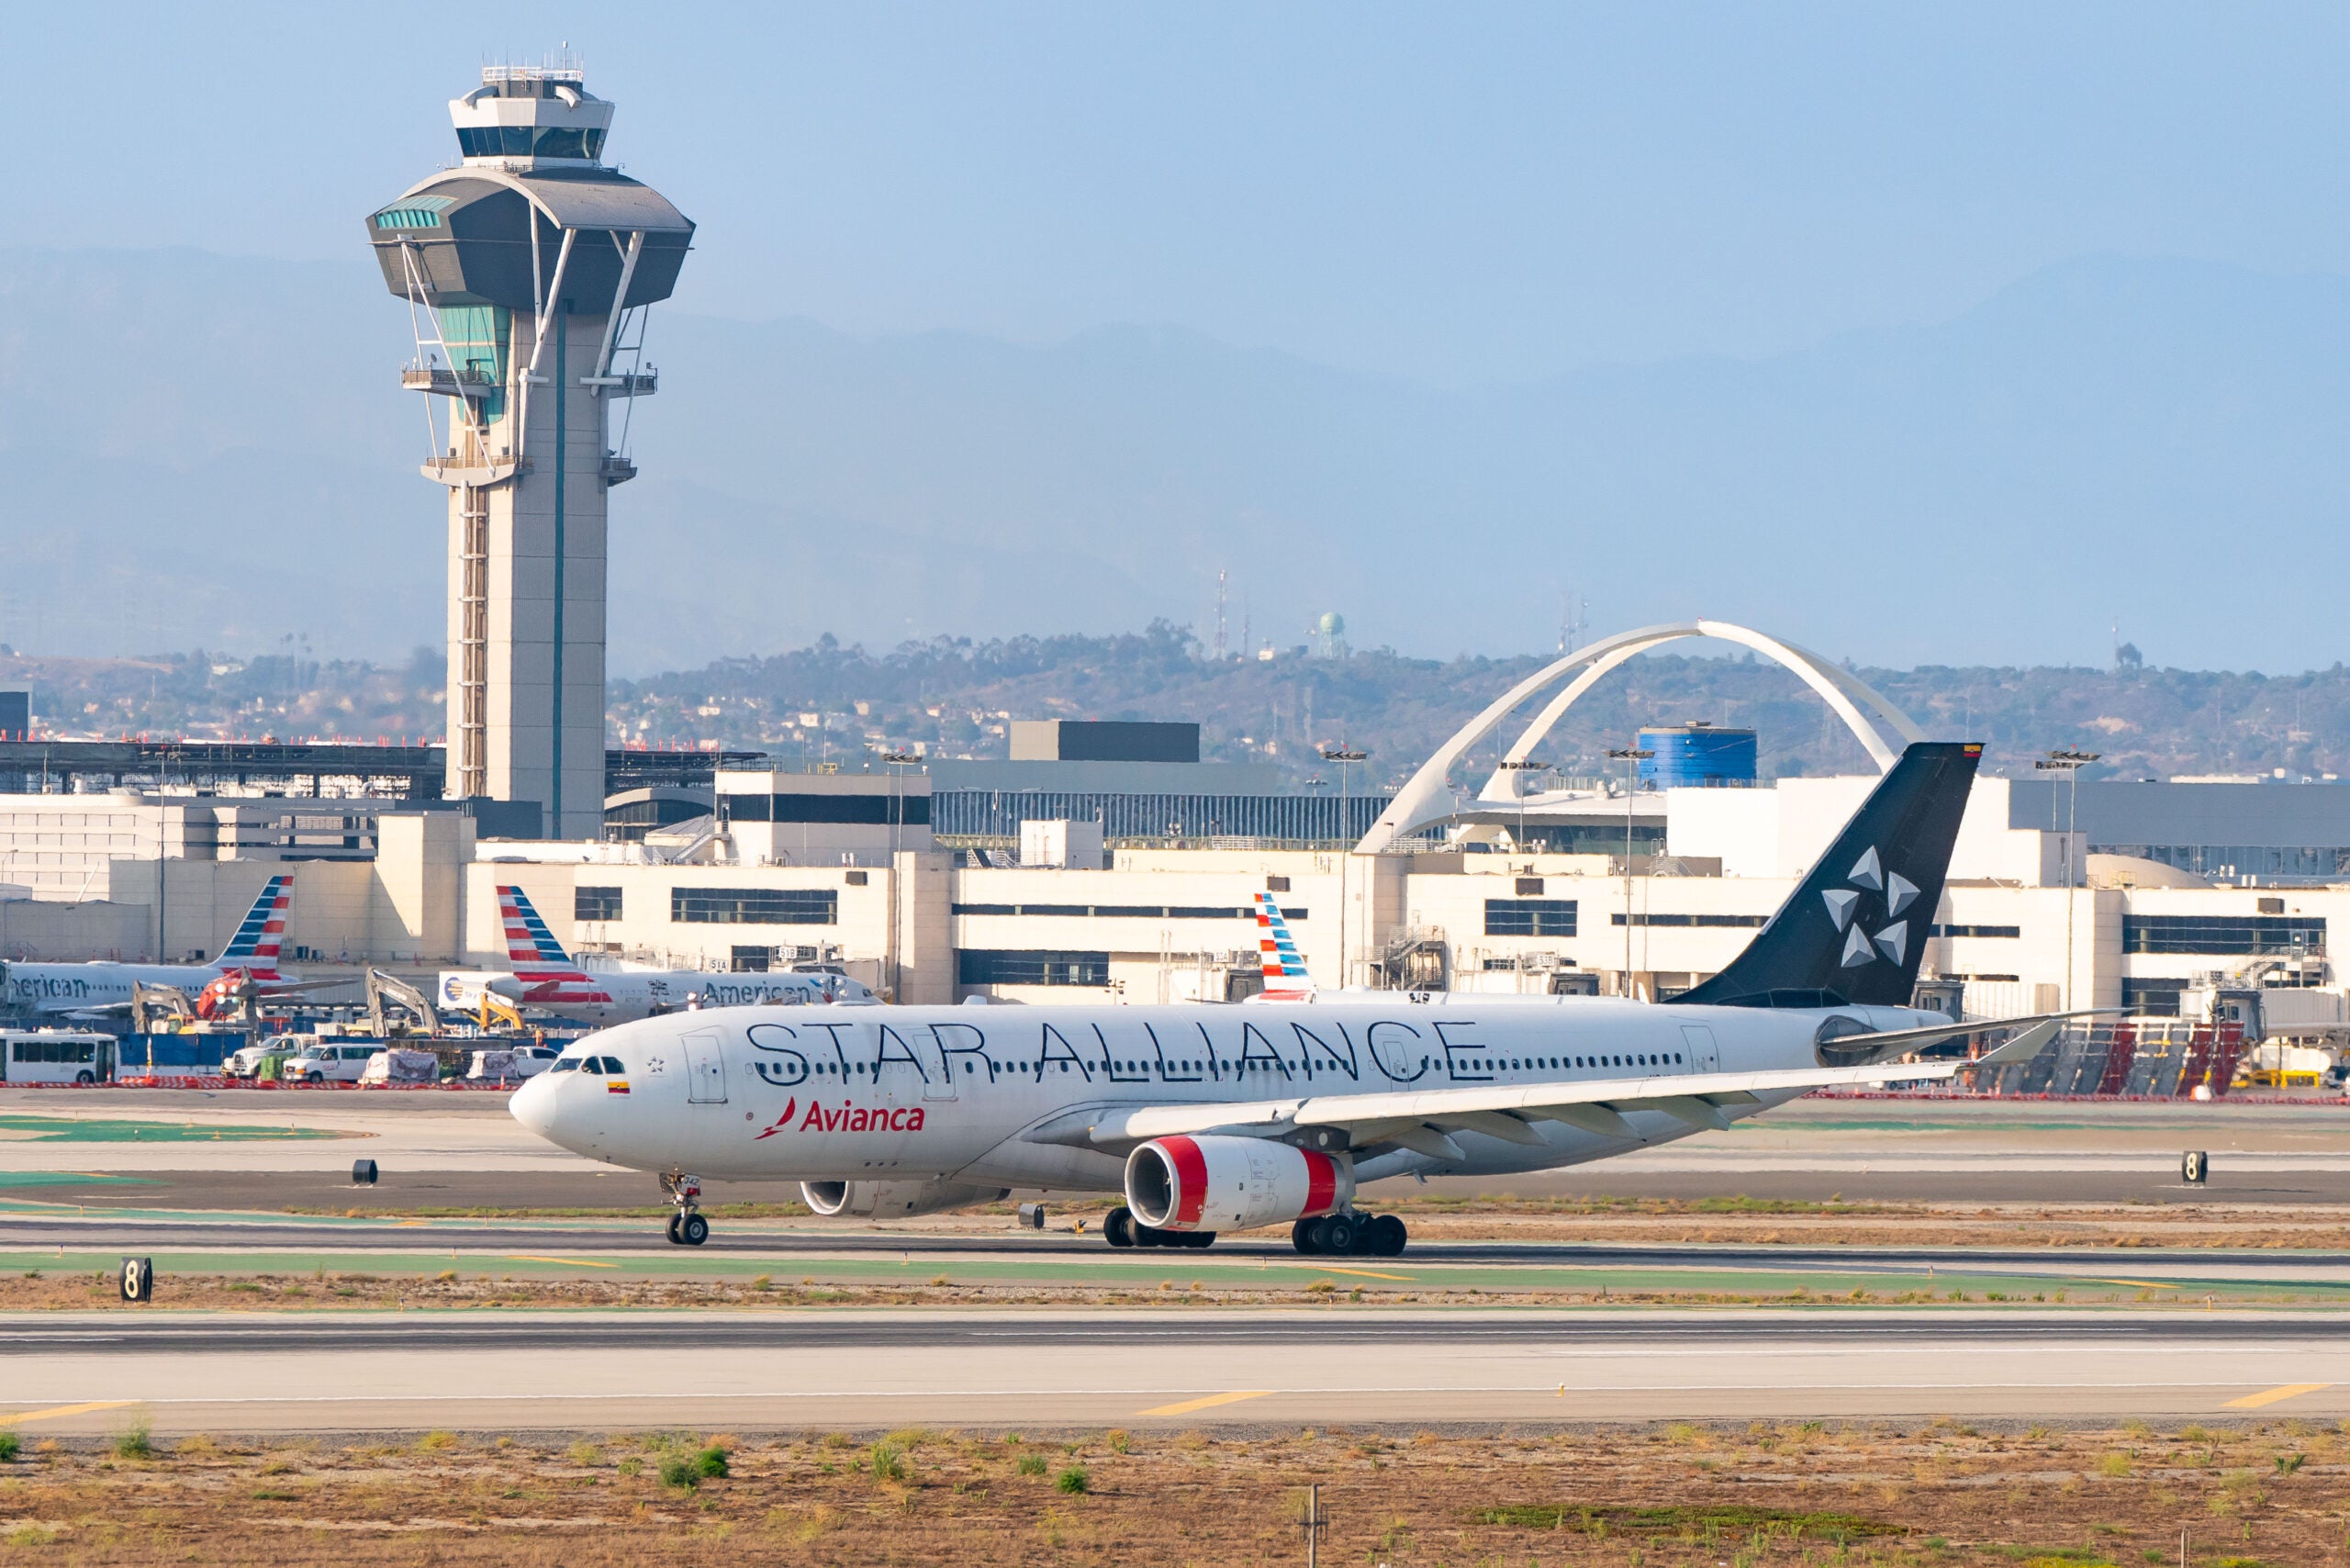 Avianca Airbus A330 in Star Alliance livery